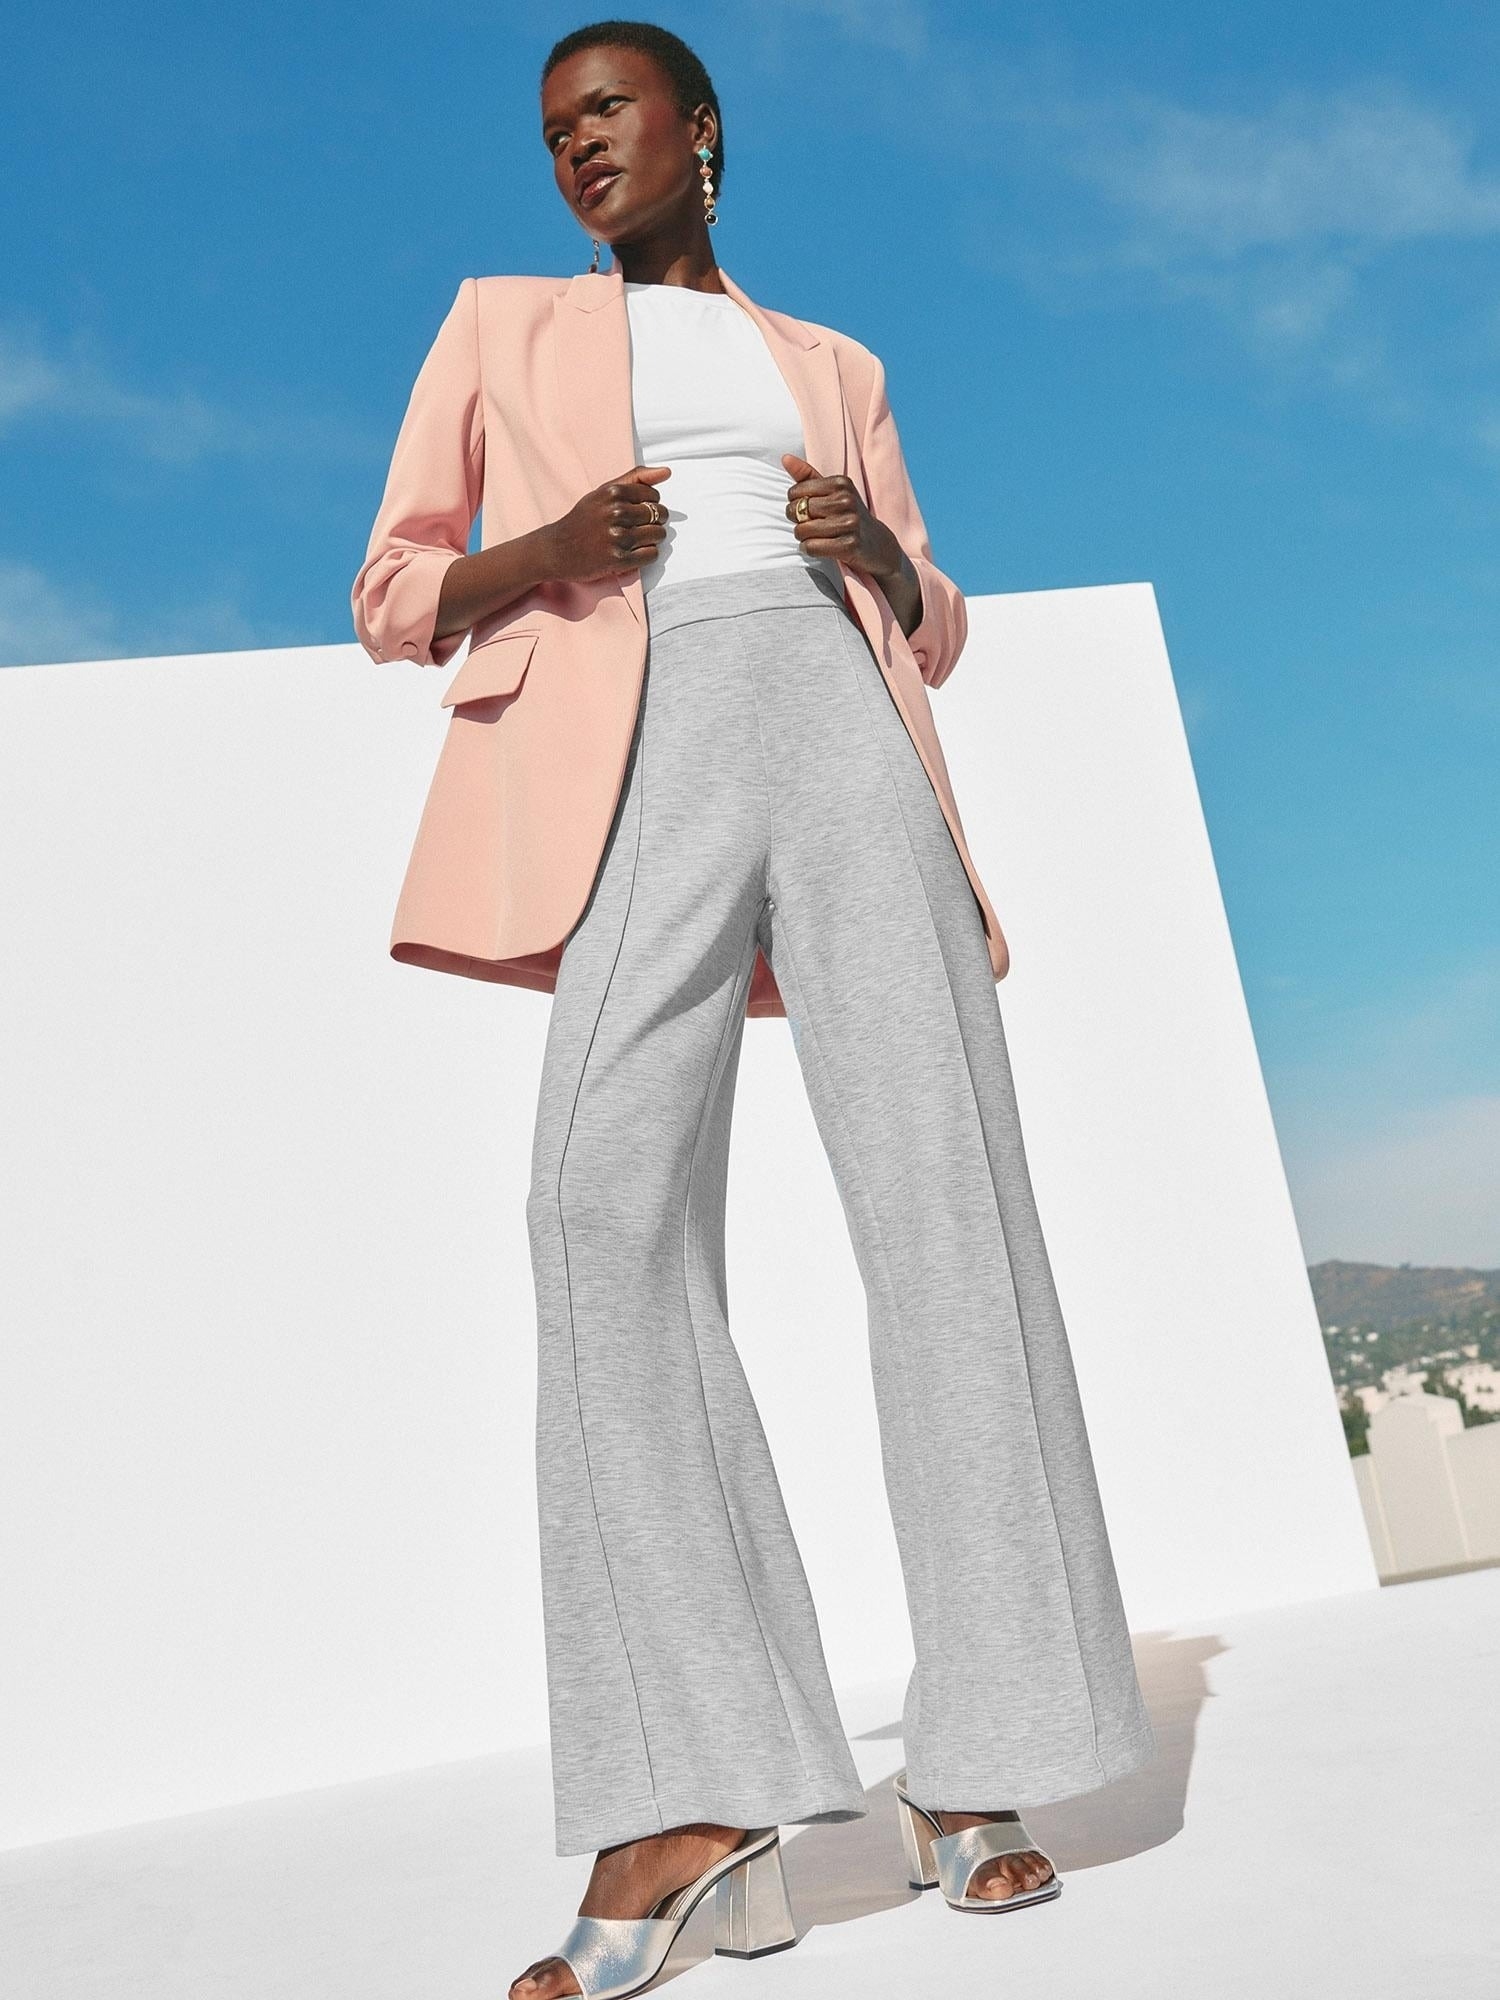 model in a business casual attire with a blazer, wide-leg trousers, and silver heeled sandals, standing against a white backdrop